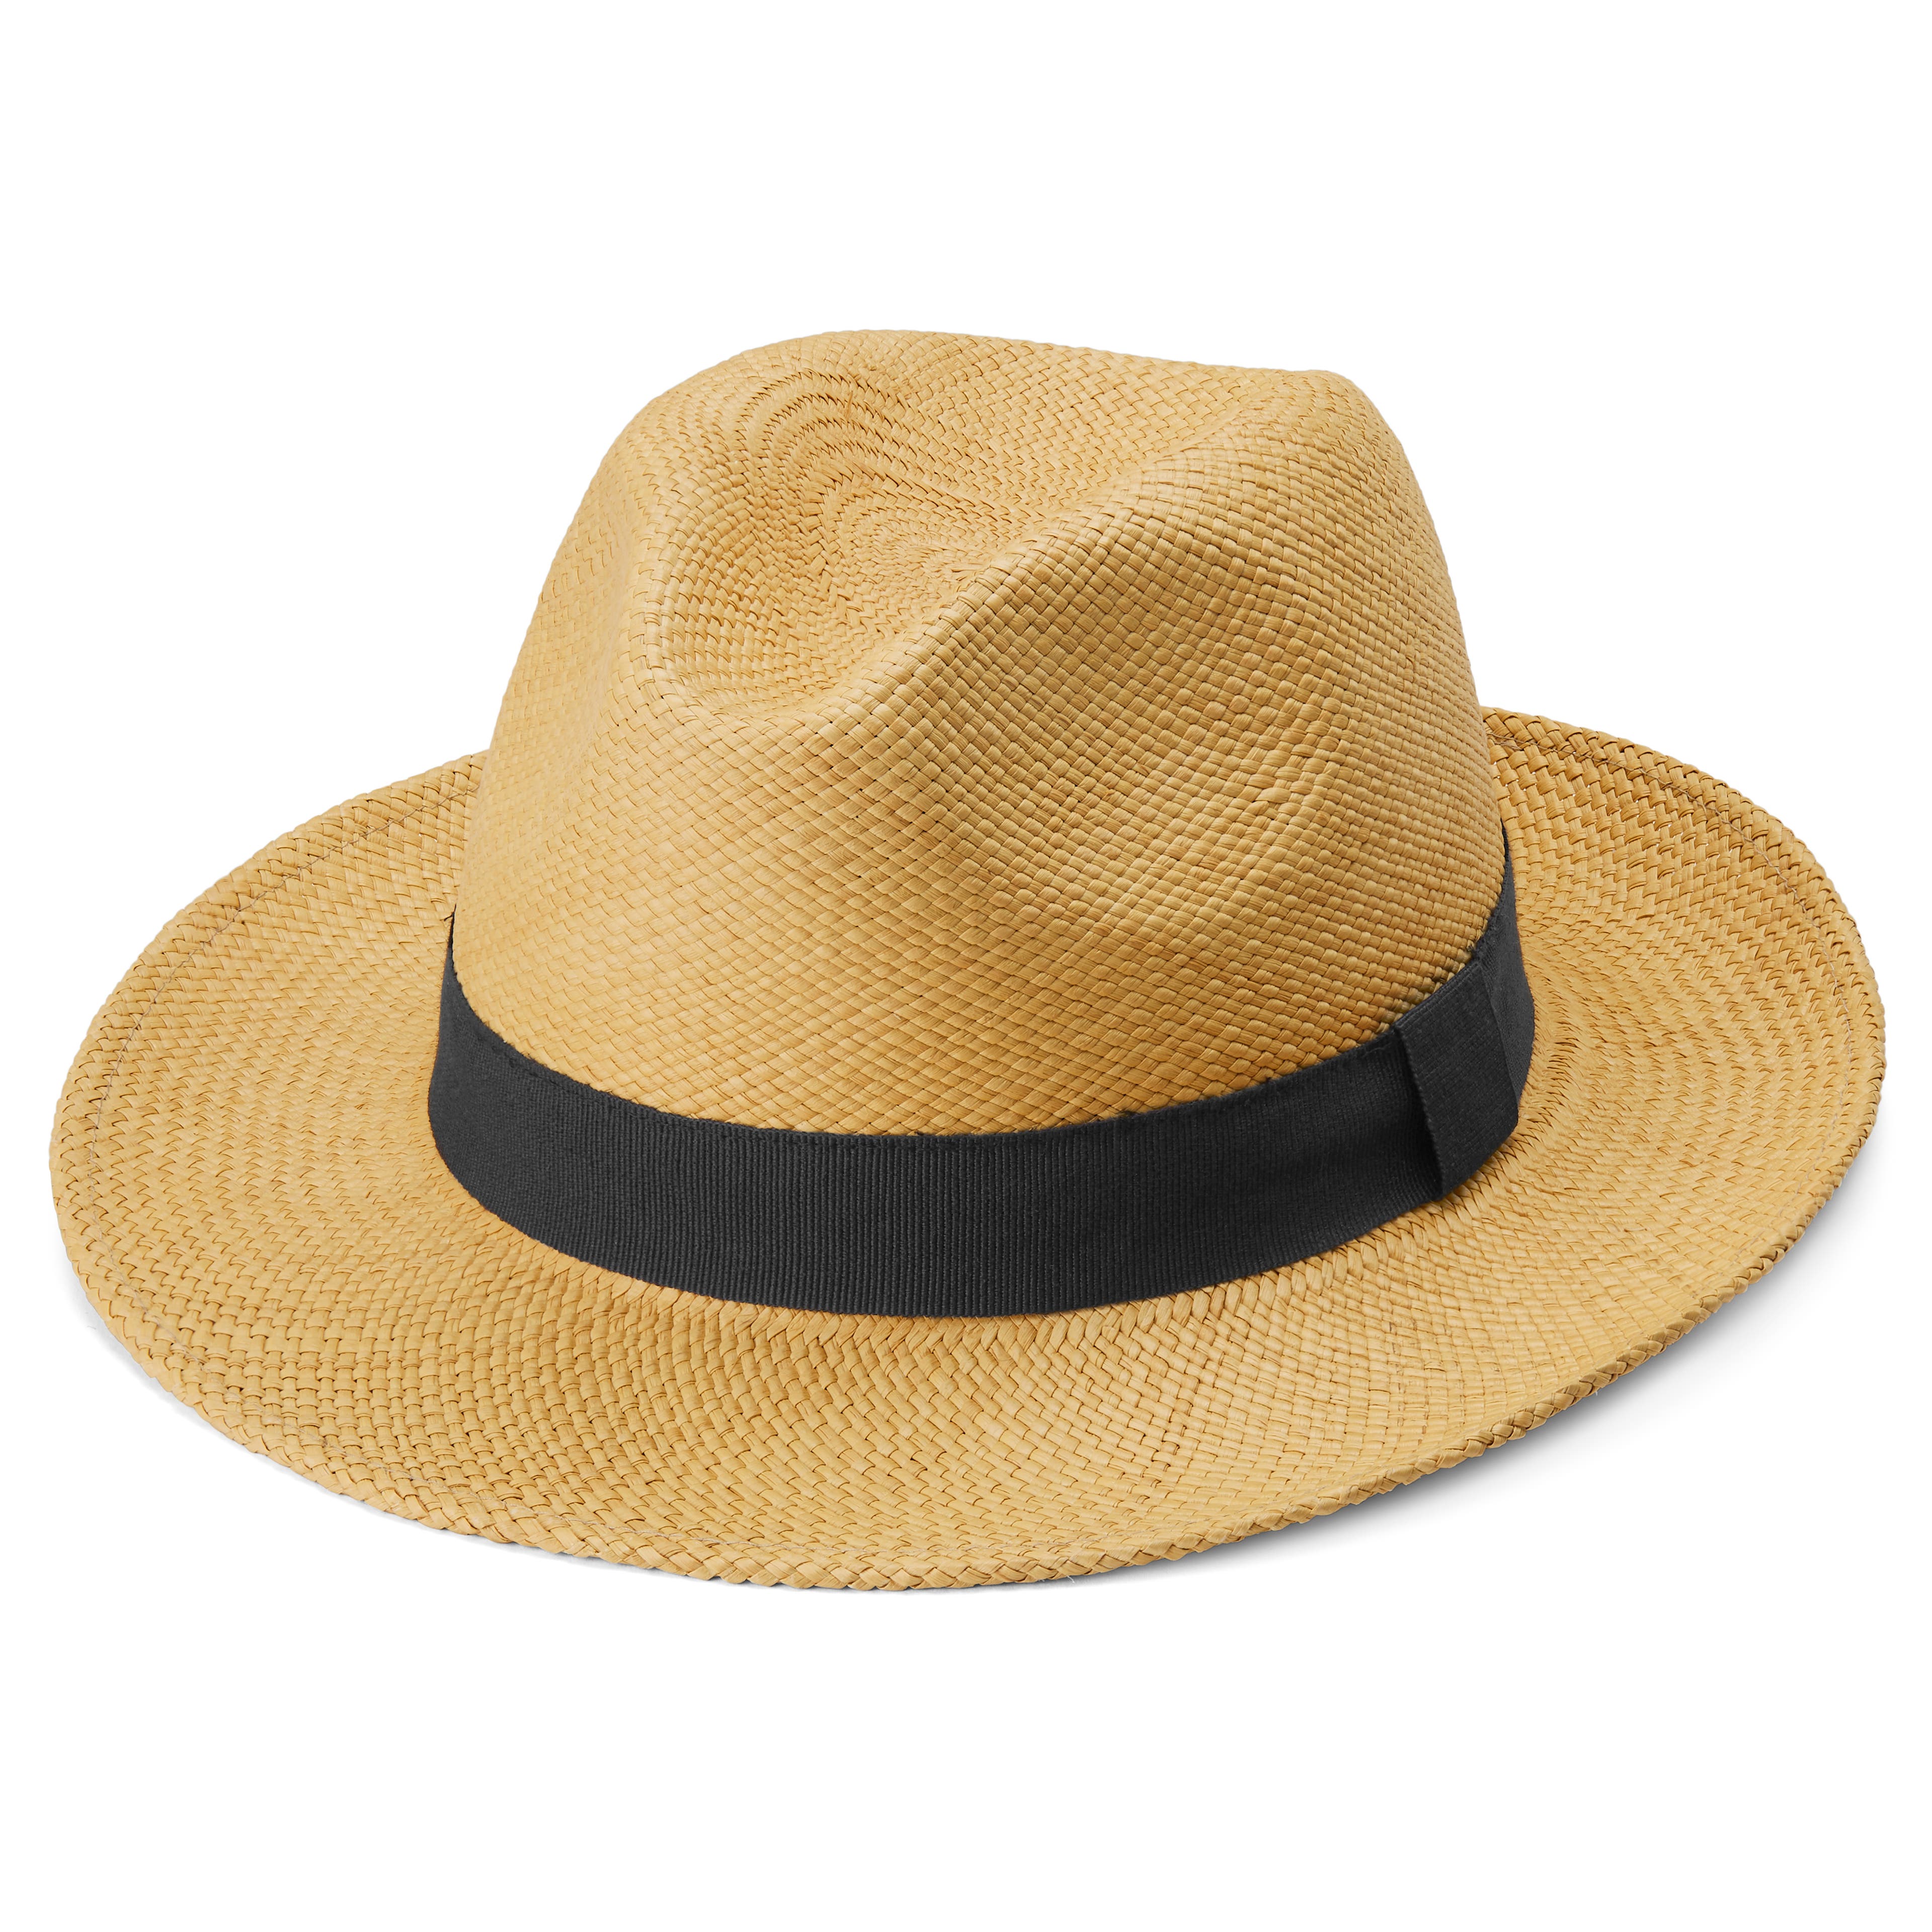 Panama Hats, 4 Styles for men in stock